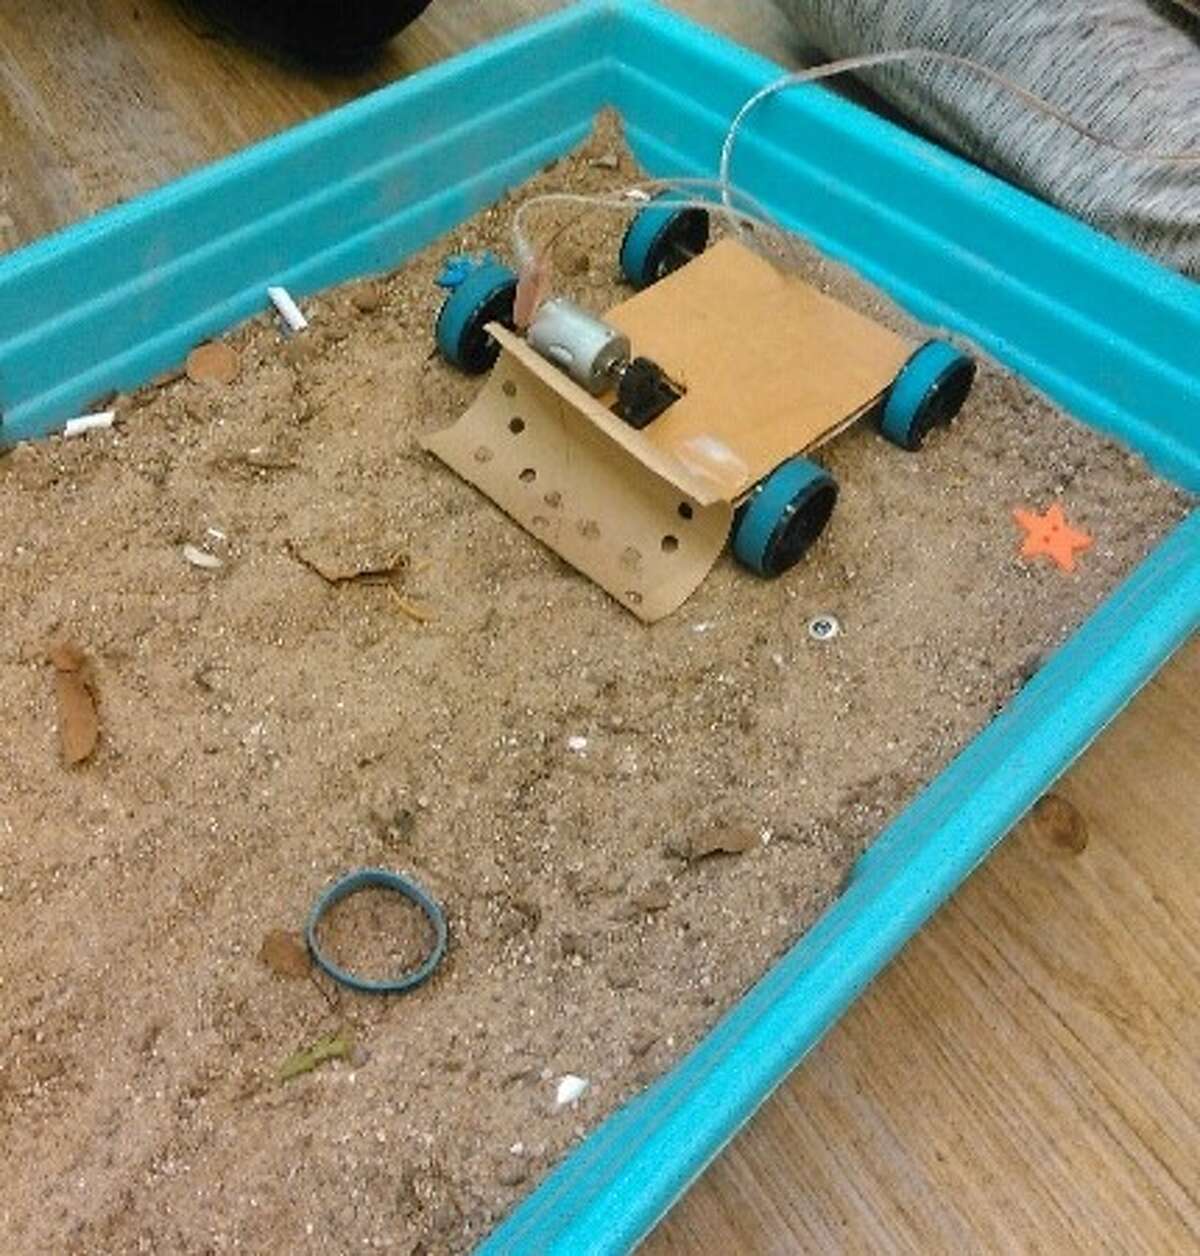 Students participating in free educational classes from the Sleeping Bear Dunes Notional Lakeshore will get the chance to make miniature sand cleaning machines. 